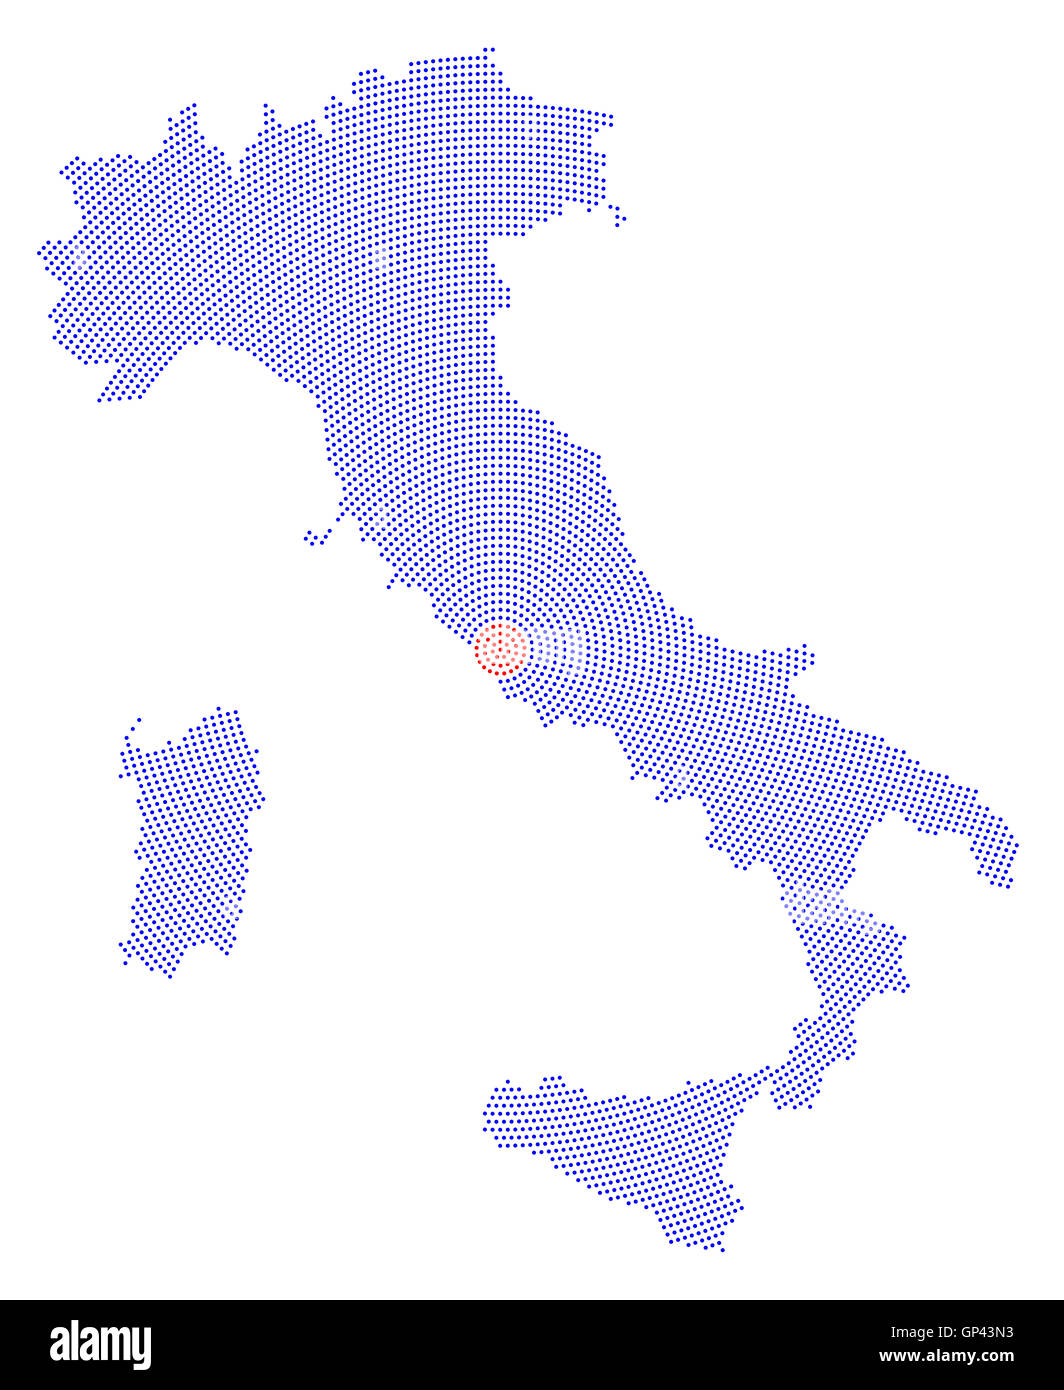 Italy map radial dot pattern. Blue dots going from the capital Rome outwards and form the boot silhouette of the country. Stock Photo